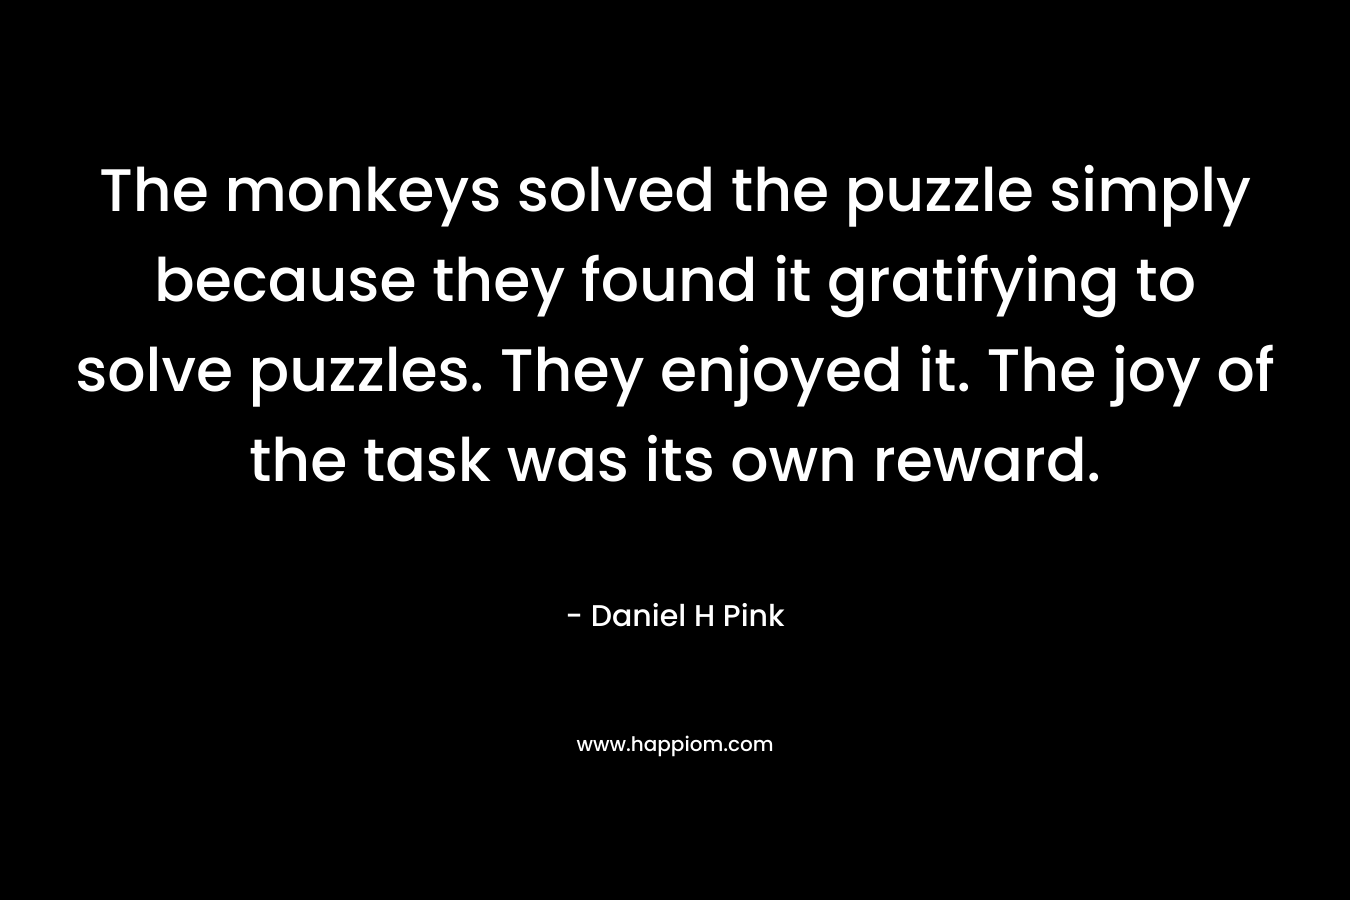 The monkeys solved the puzzle simply because they found it gratifying to solve puzzles. They enjoyed it. The joy of the task was its own reward. – Daniel H Pink